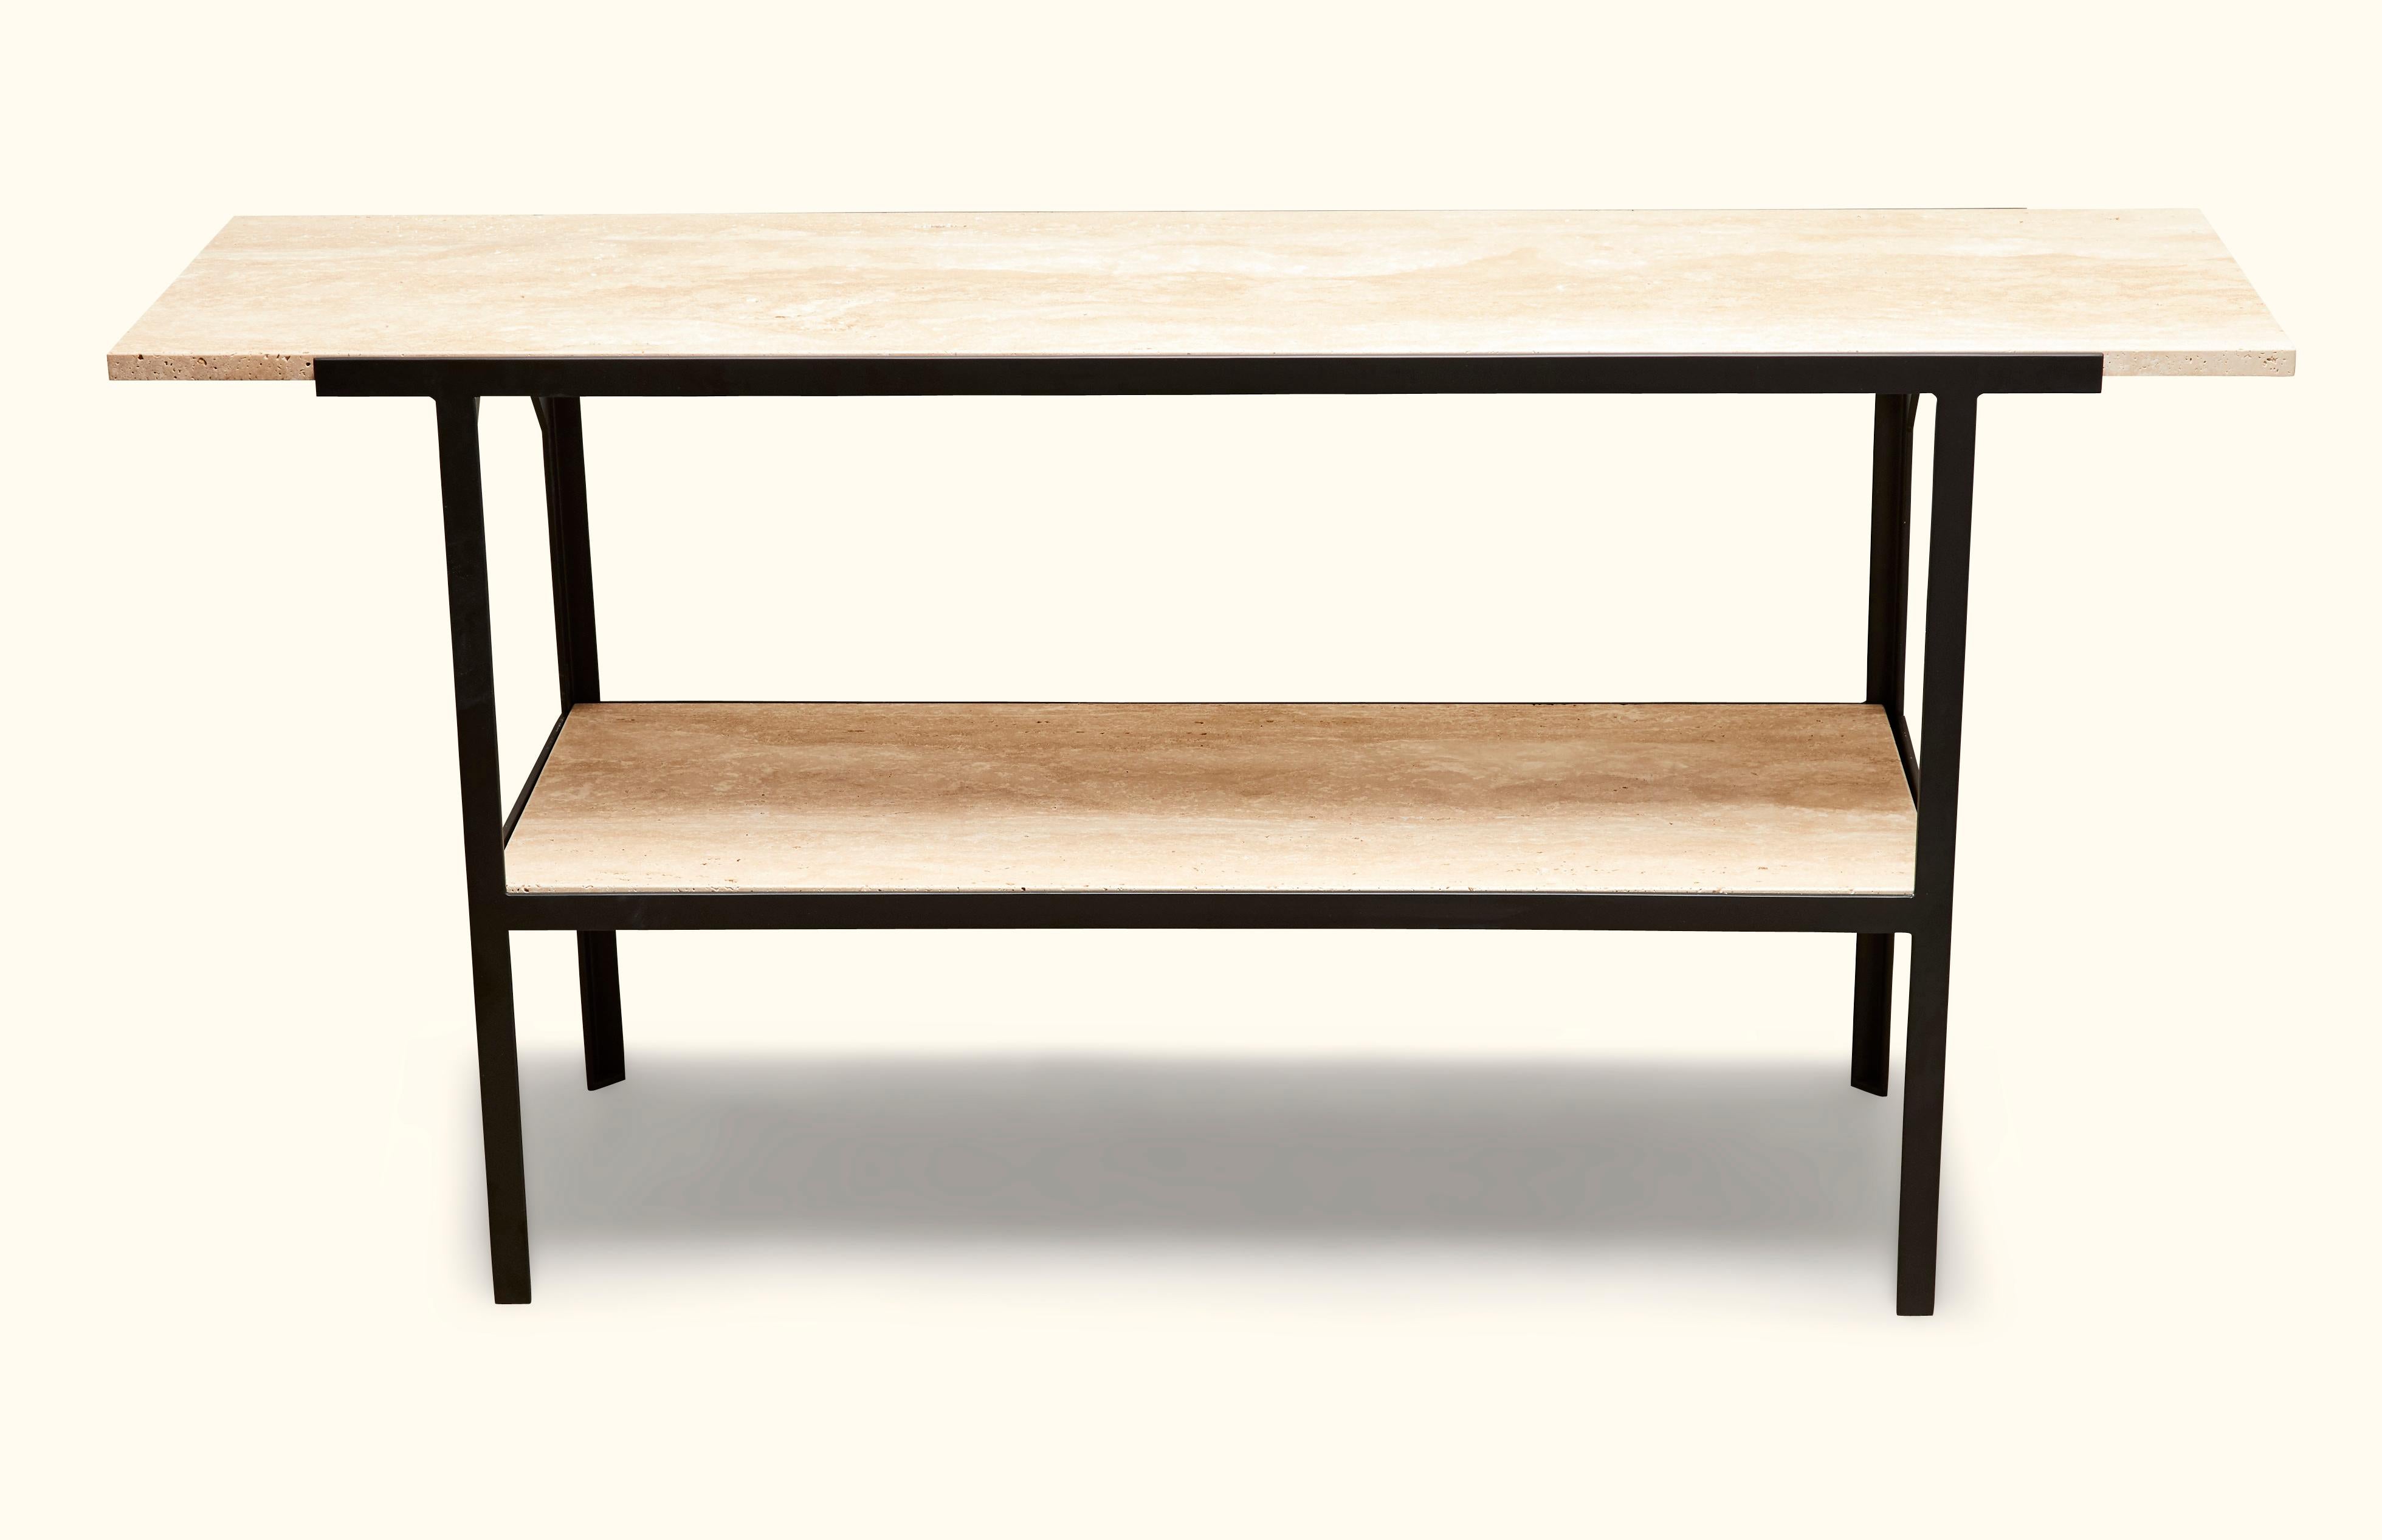 The Montrose console table with shelf features a powdercoated steel base with a minimal honed travertine stone top. For indoor or outdoor use. 

The Lawson-Fenning Collection is designed and handmade in Los Angeles, California.

Can be made to order